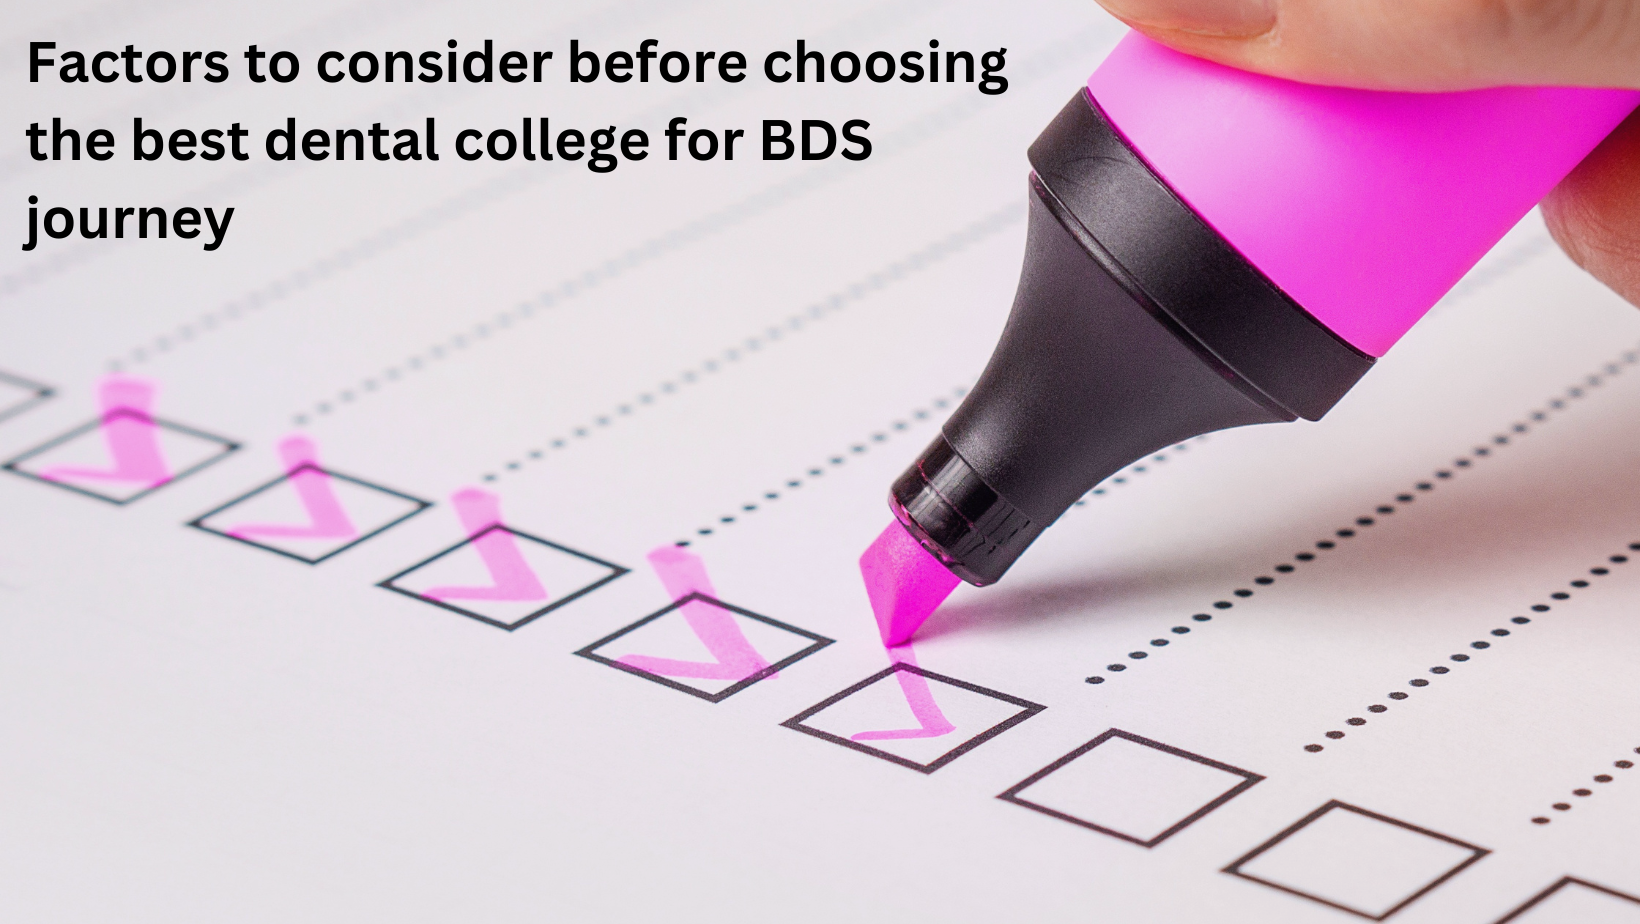 Factors to consider before choosing the best dental college for BDS journey